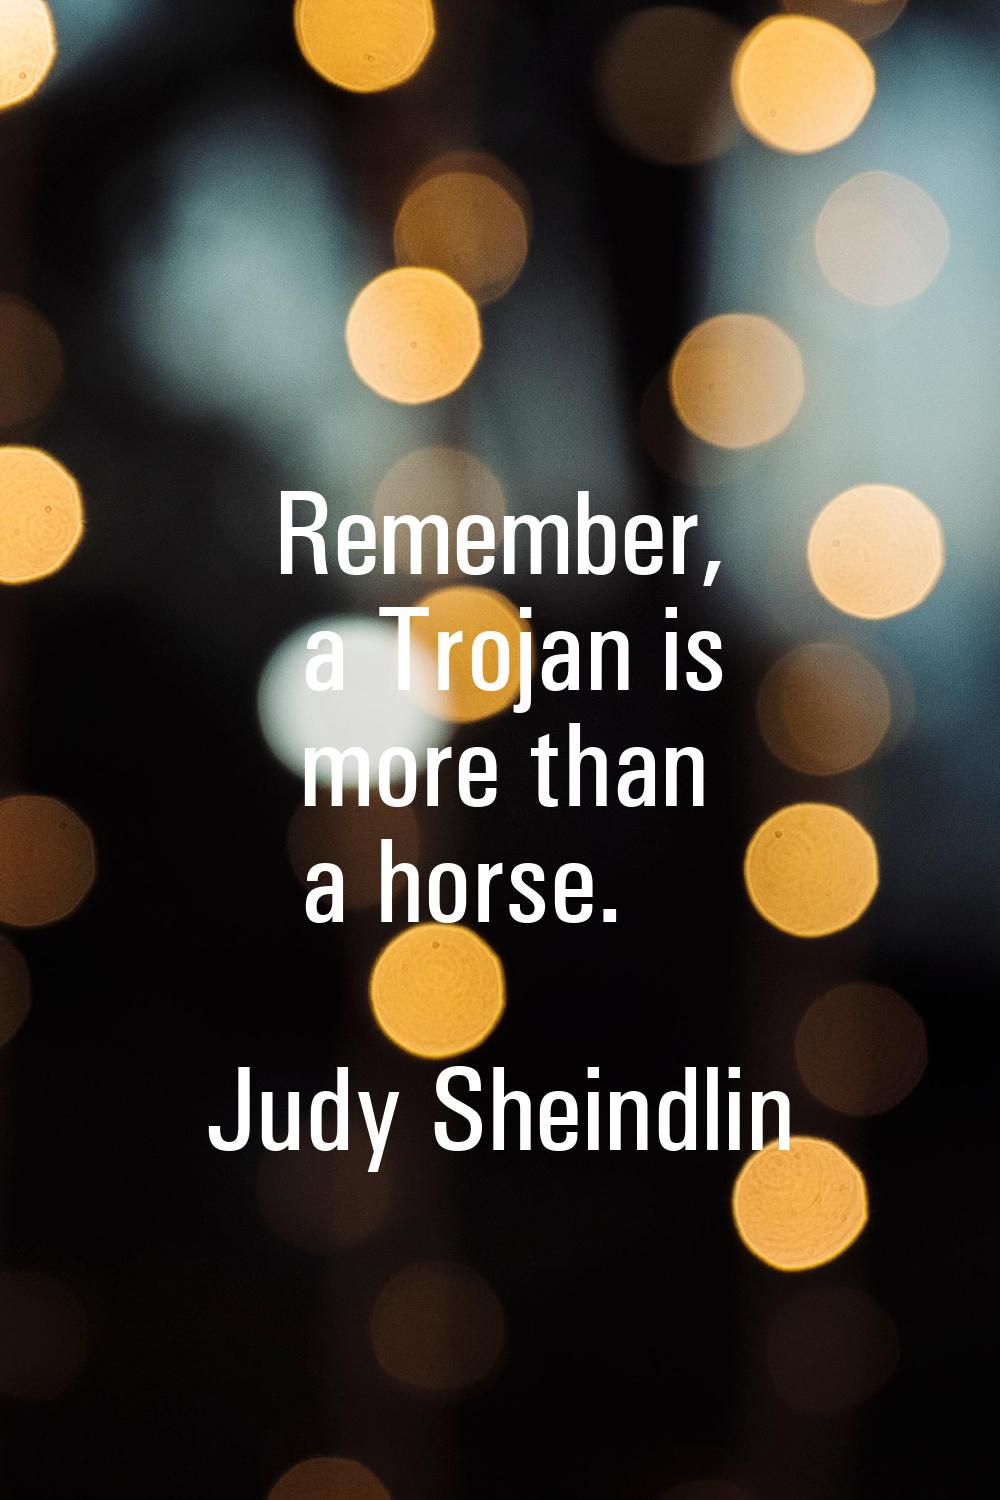 Remember, a Trojan is more than a horse.